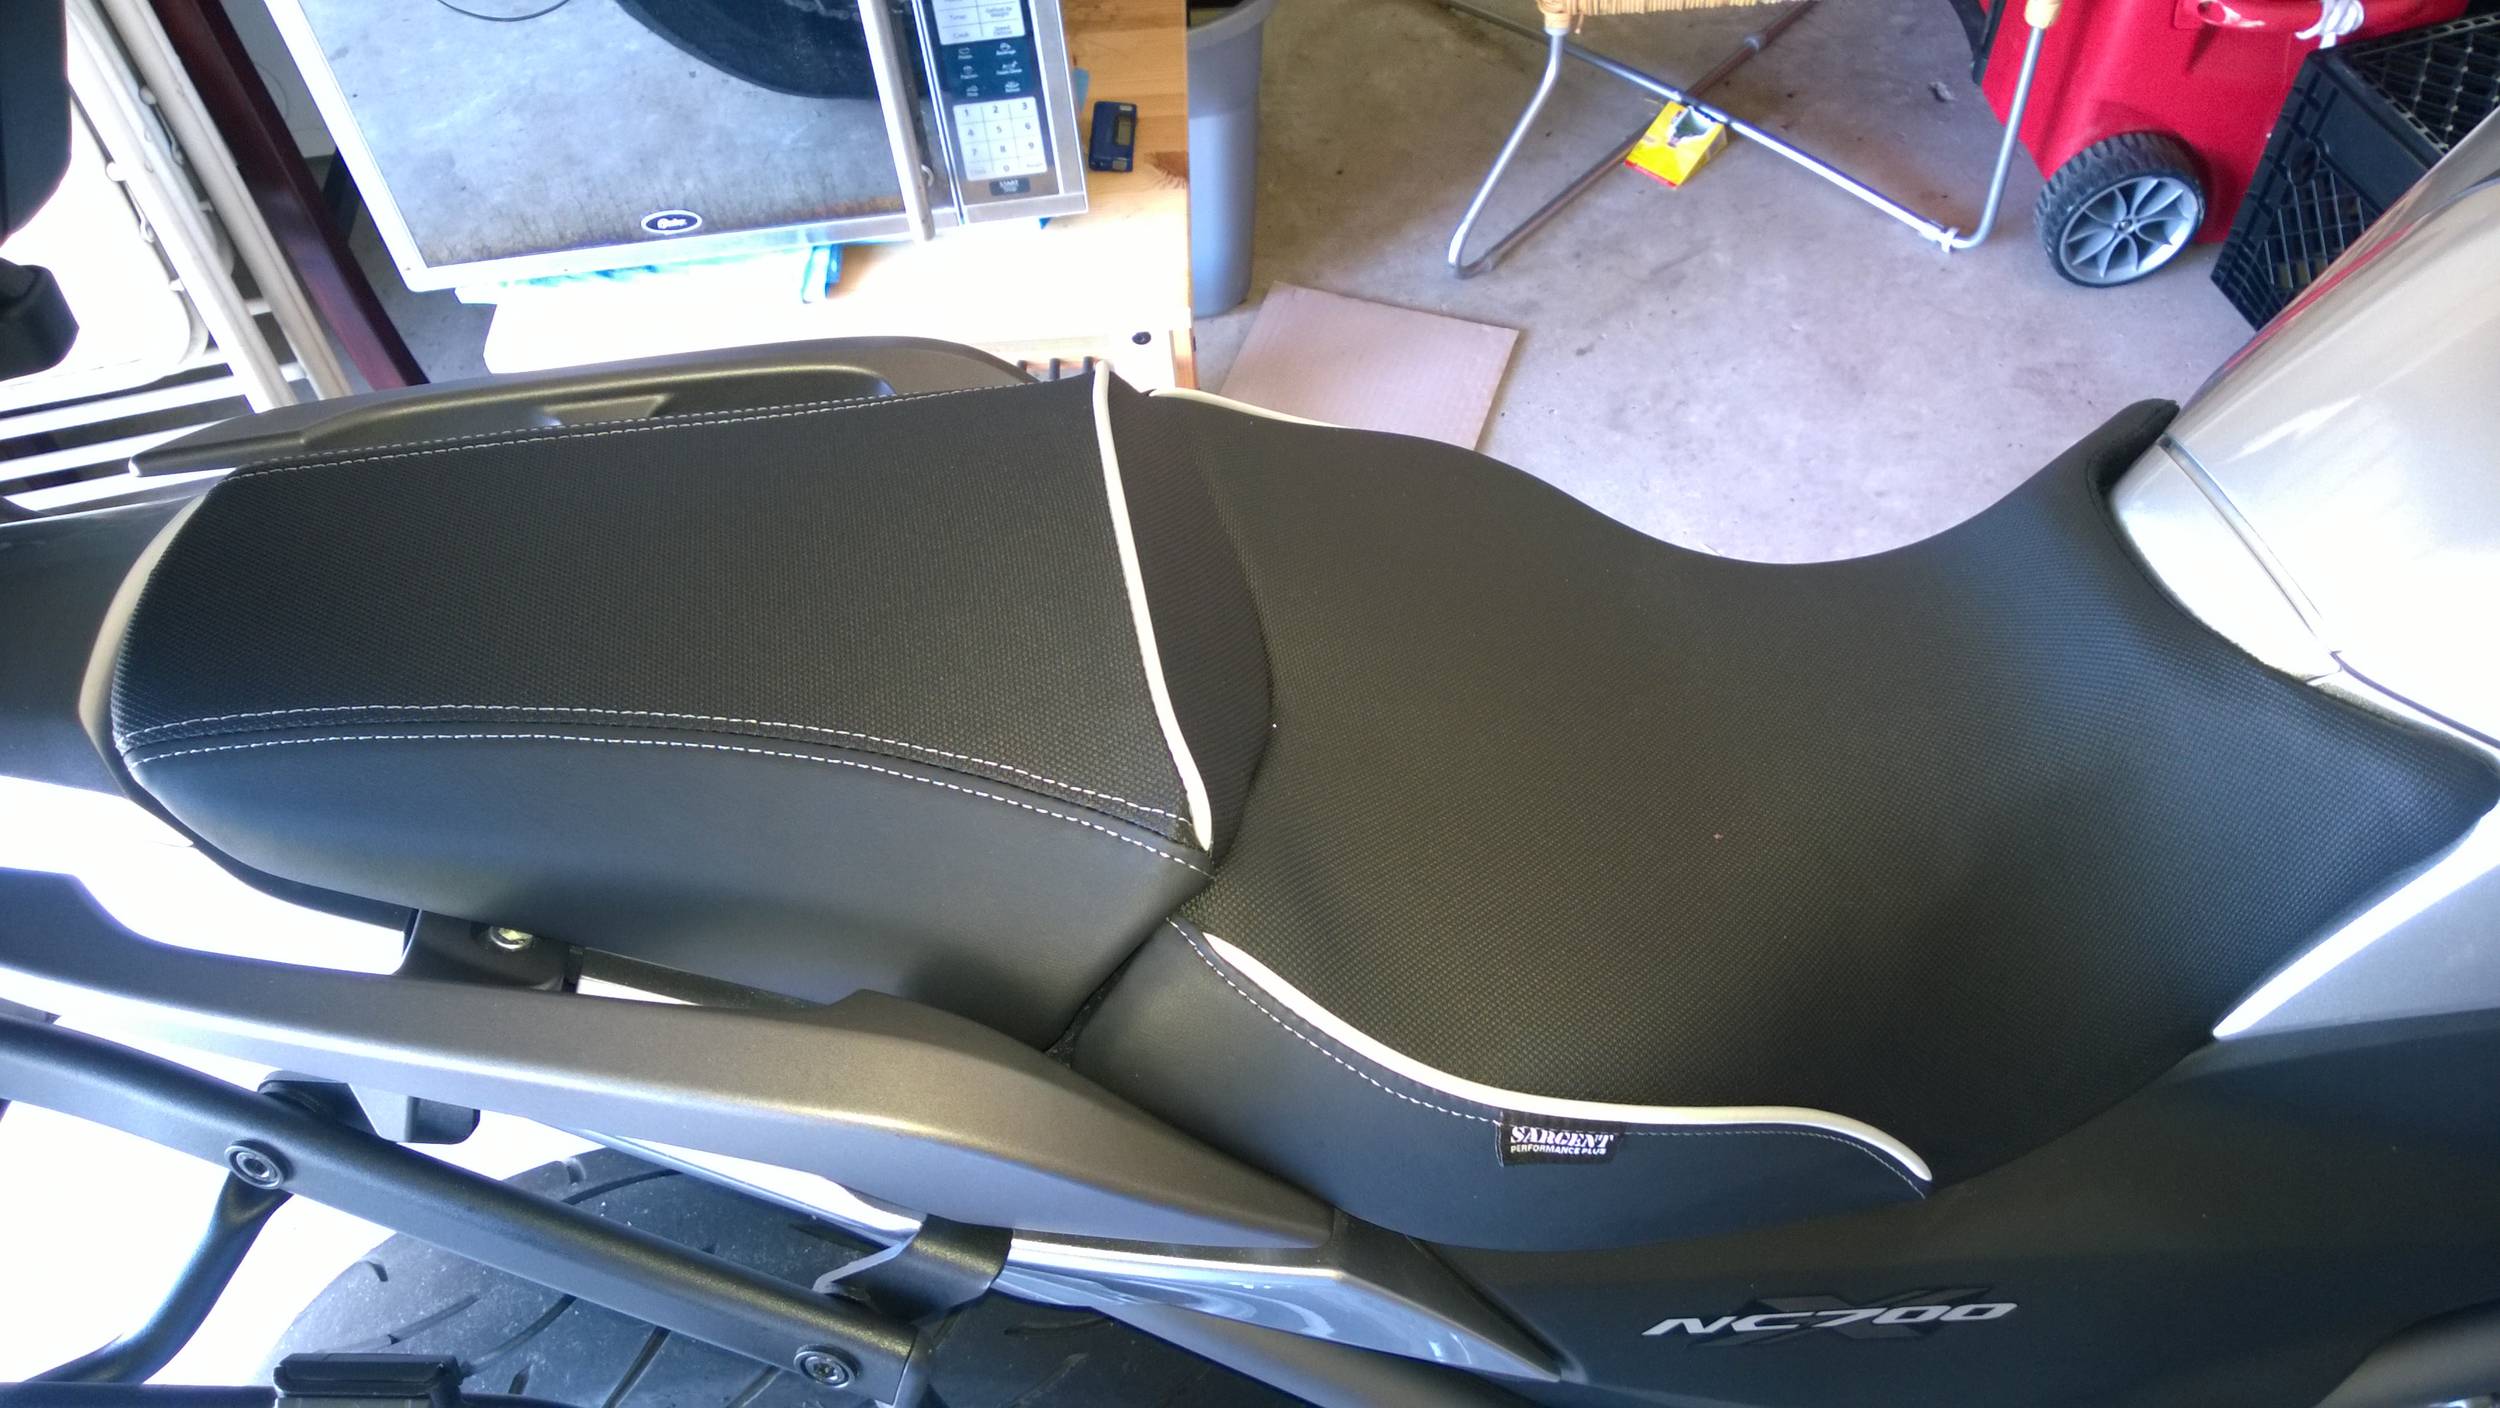 Seat and passenger seat cover